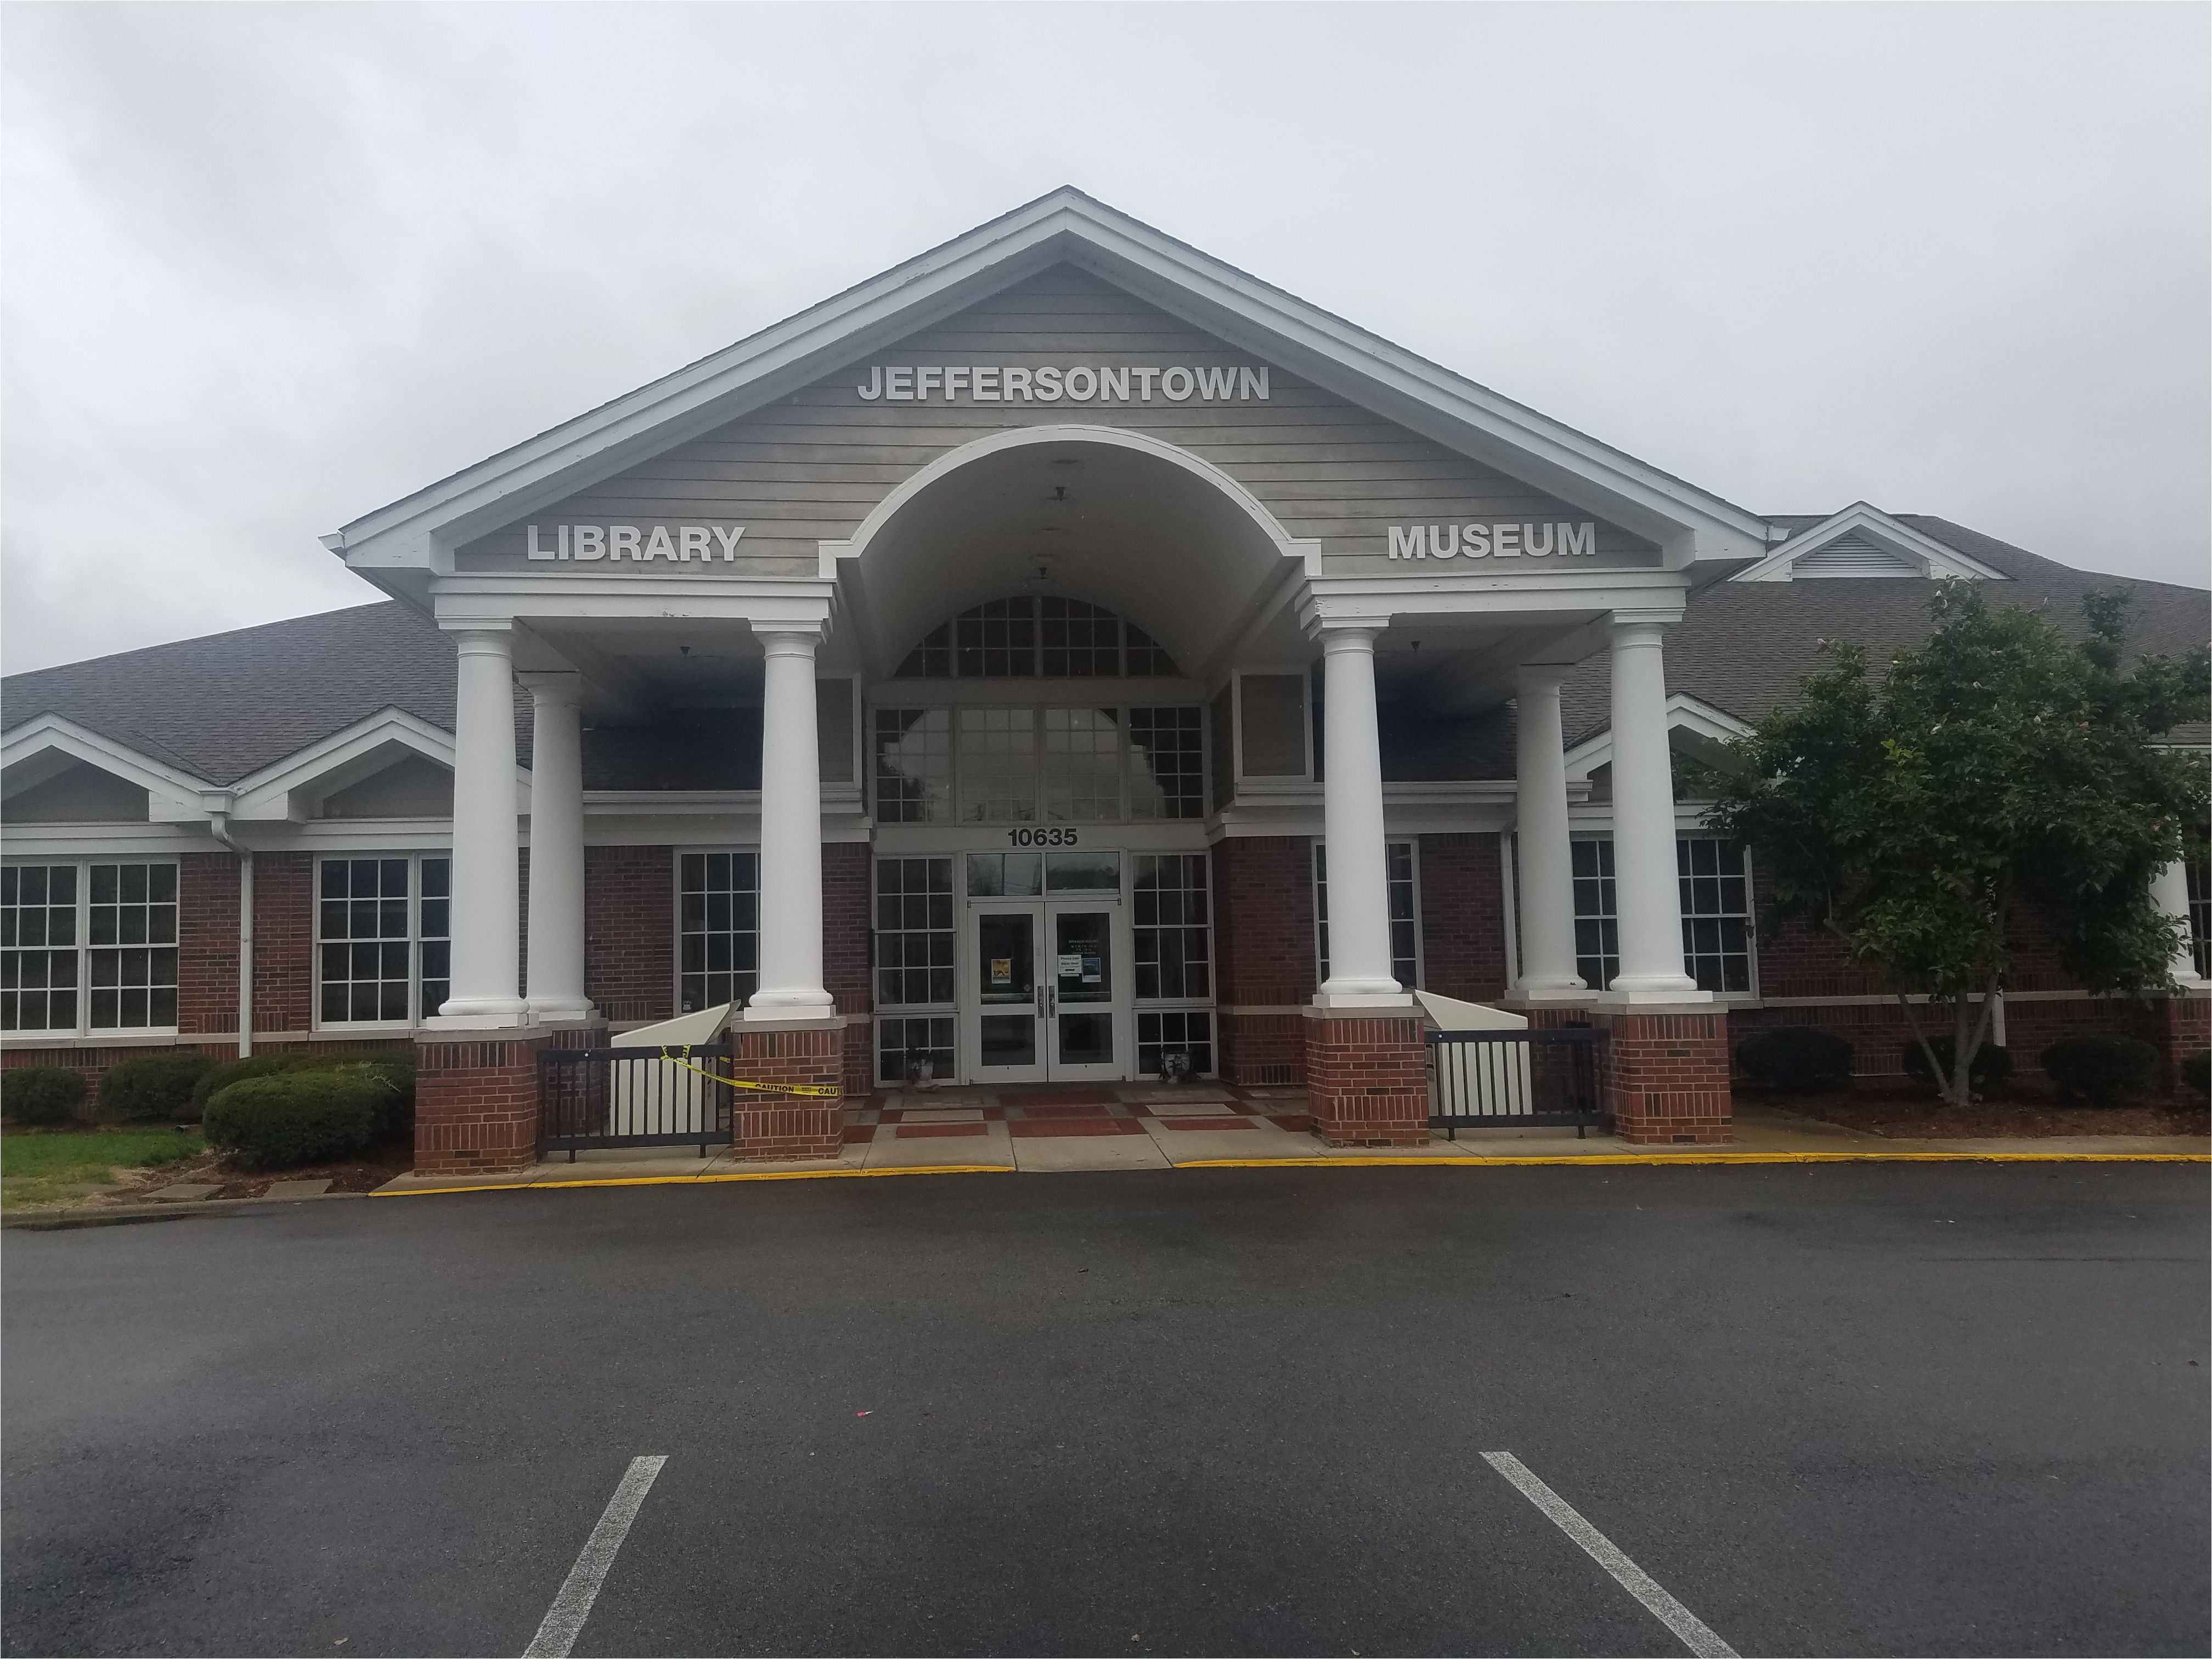 jeffersontown ky library main entrance july 2017 5ae15a63a474be00366496f7 jpg